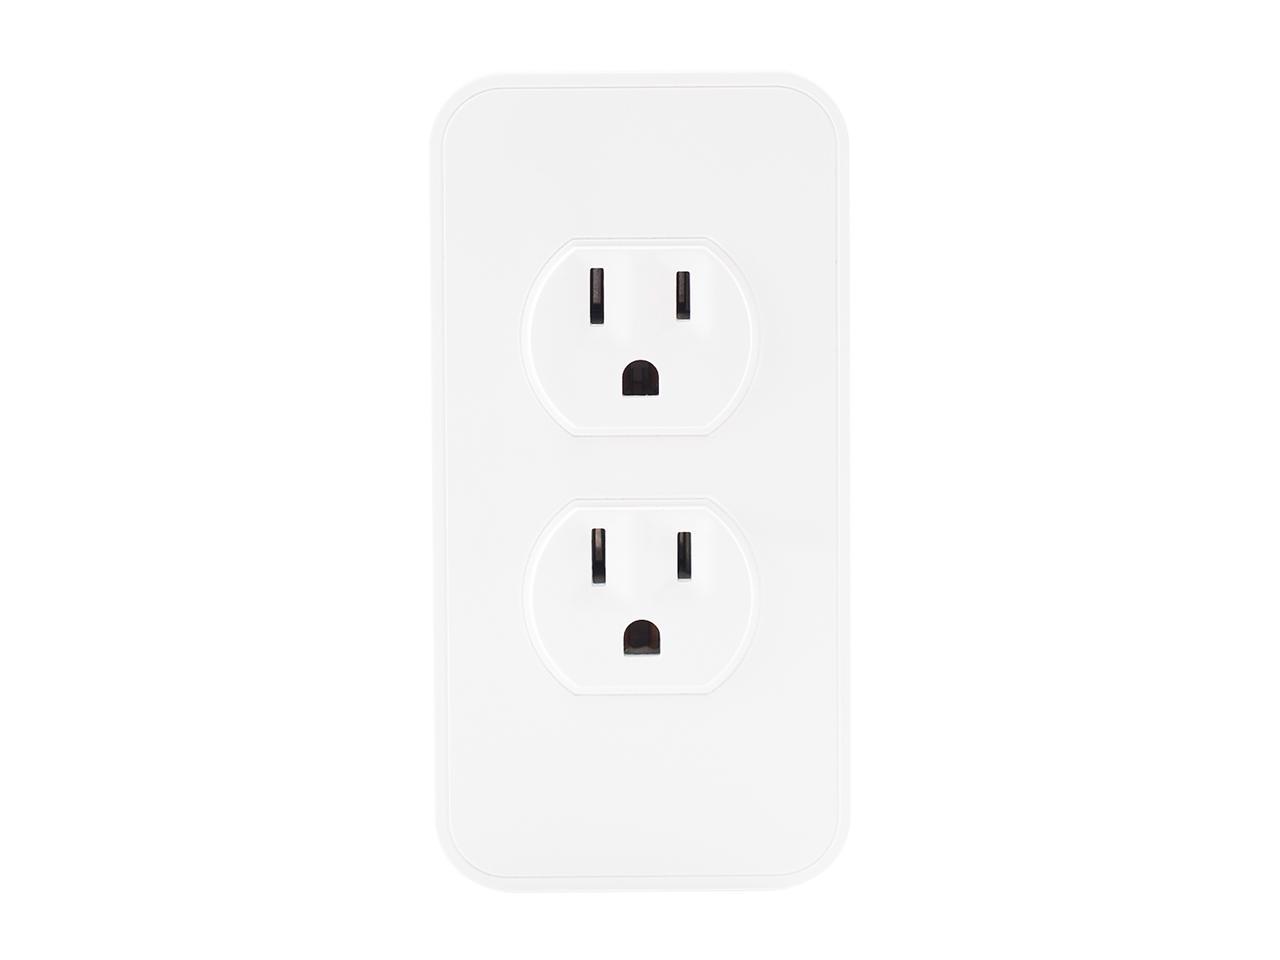 dual-smart-power-outlet-drsm004-new-white-2